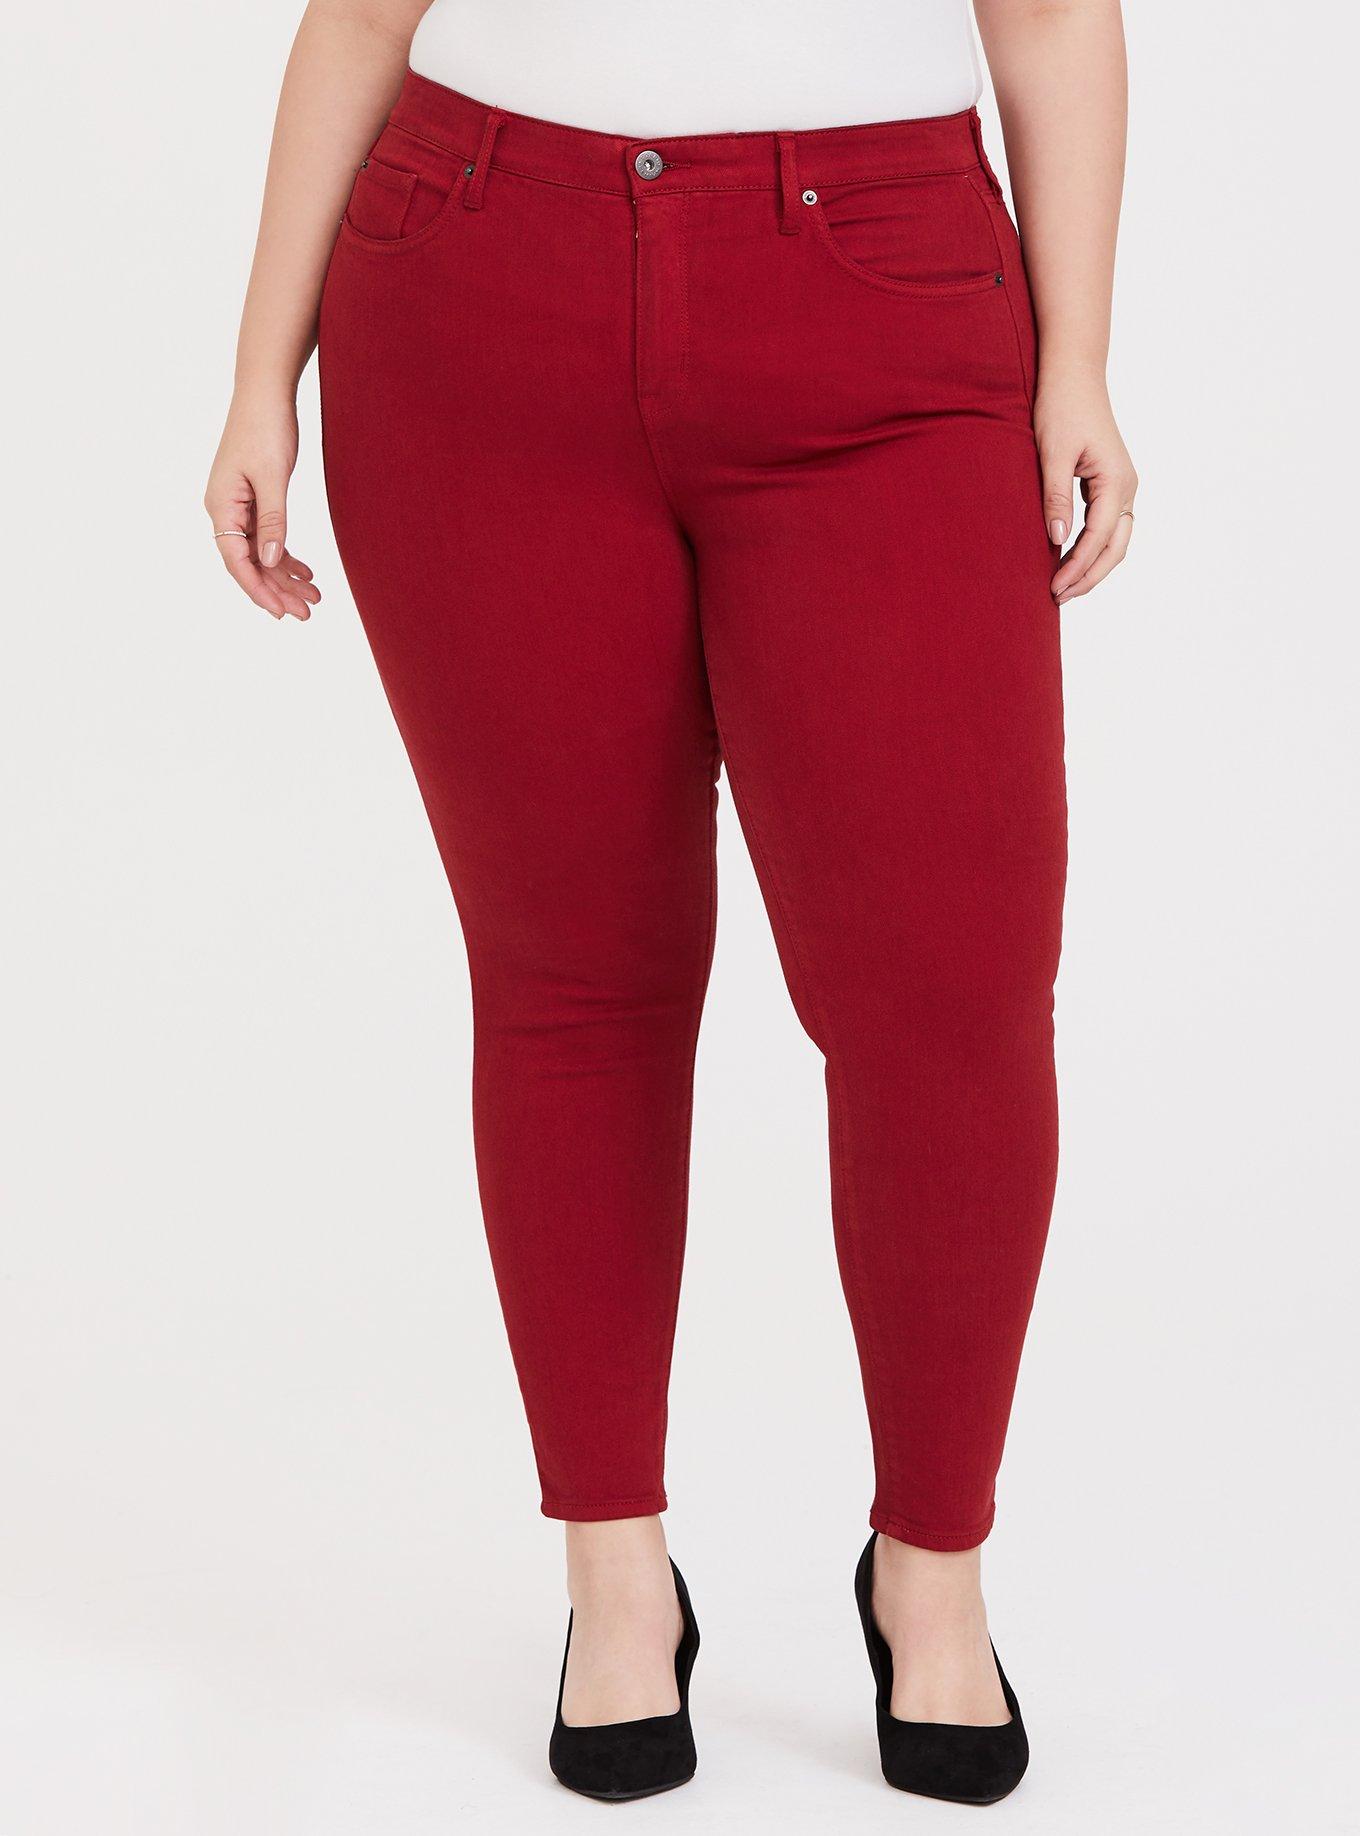 Red High Waisted Stretch Jeggings With Thick Waist Band, Jeggings